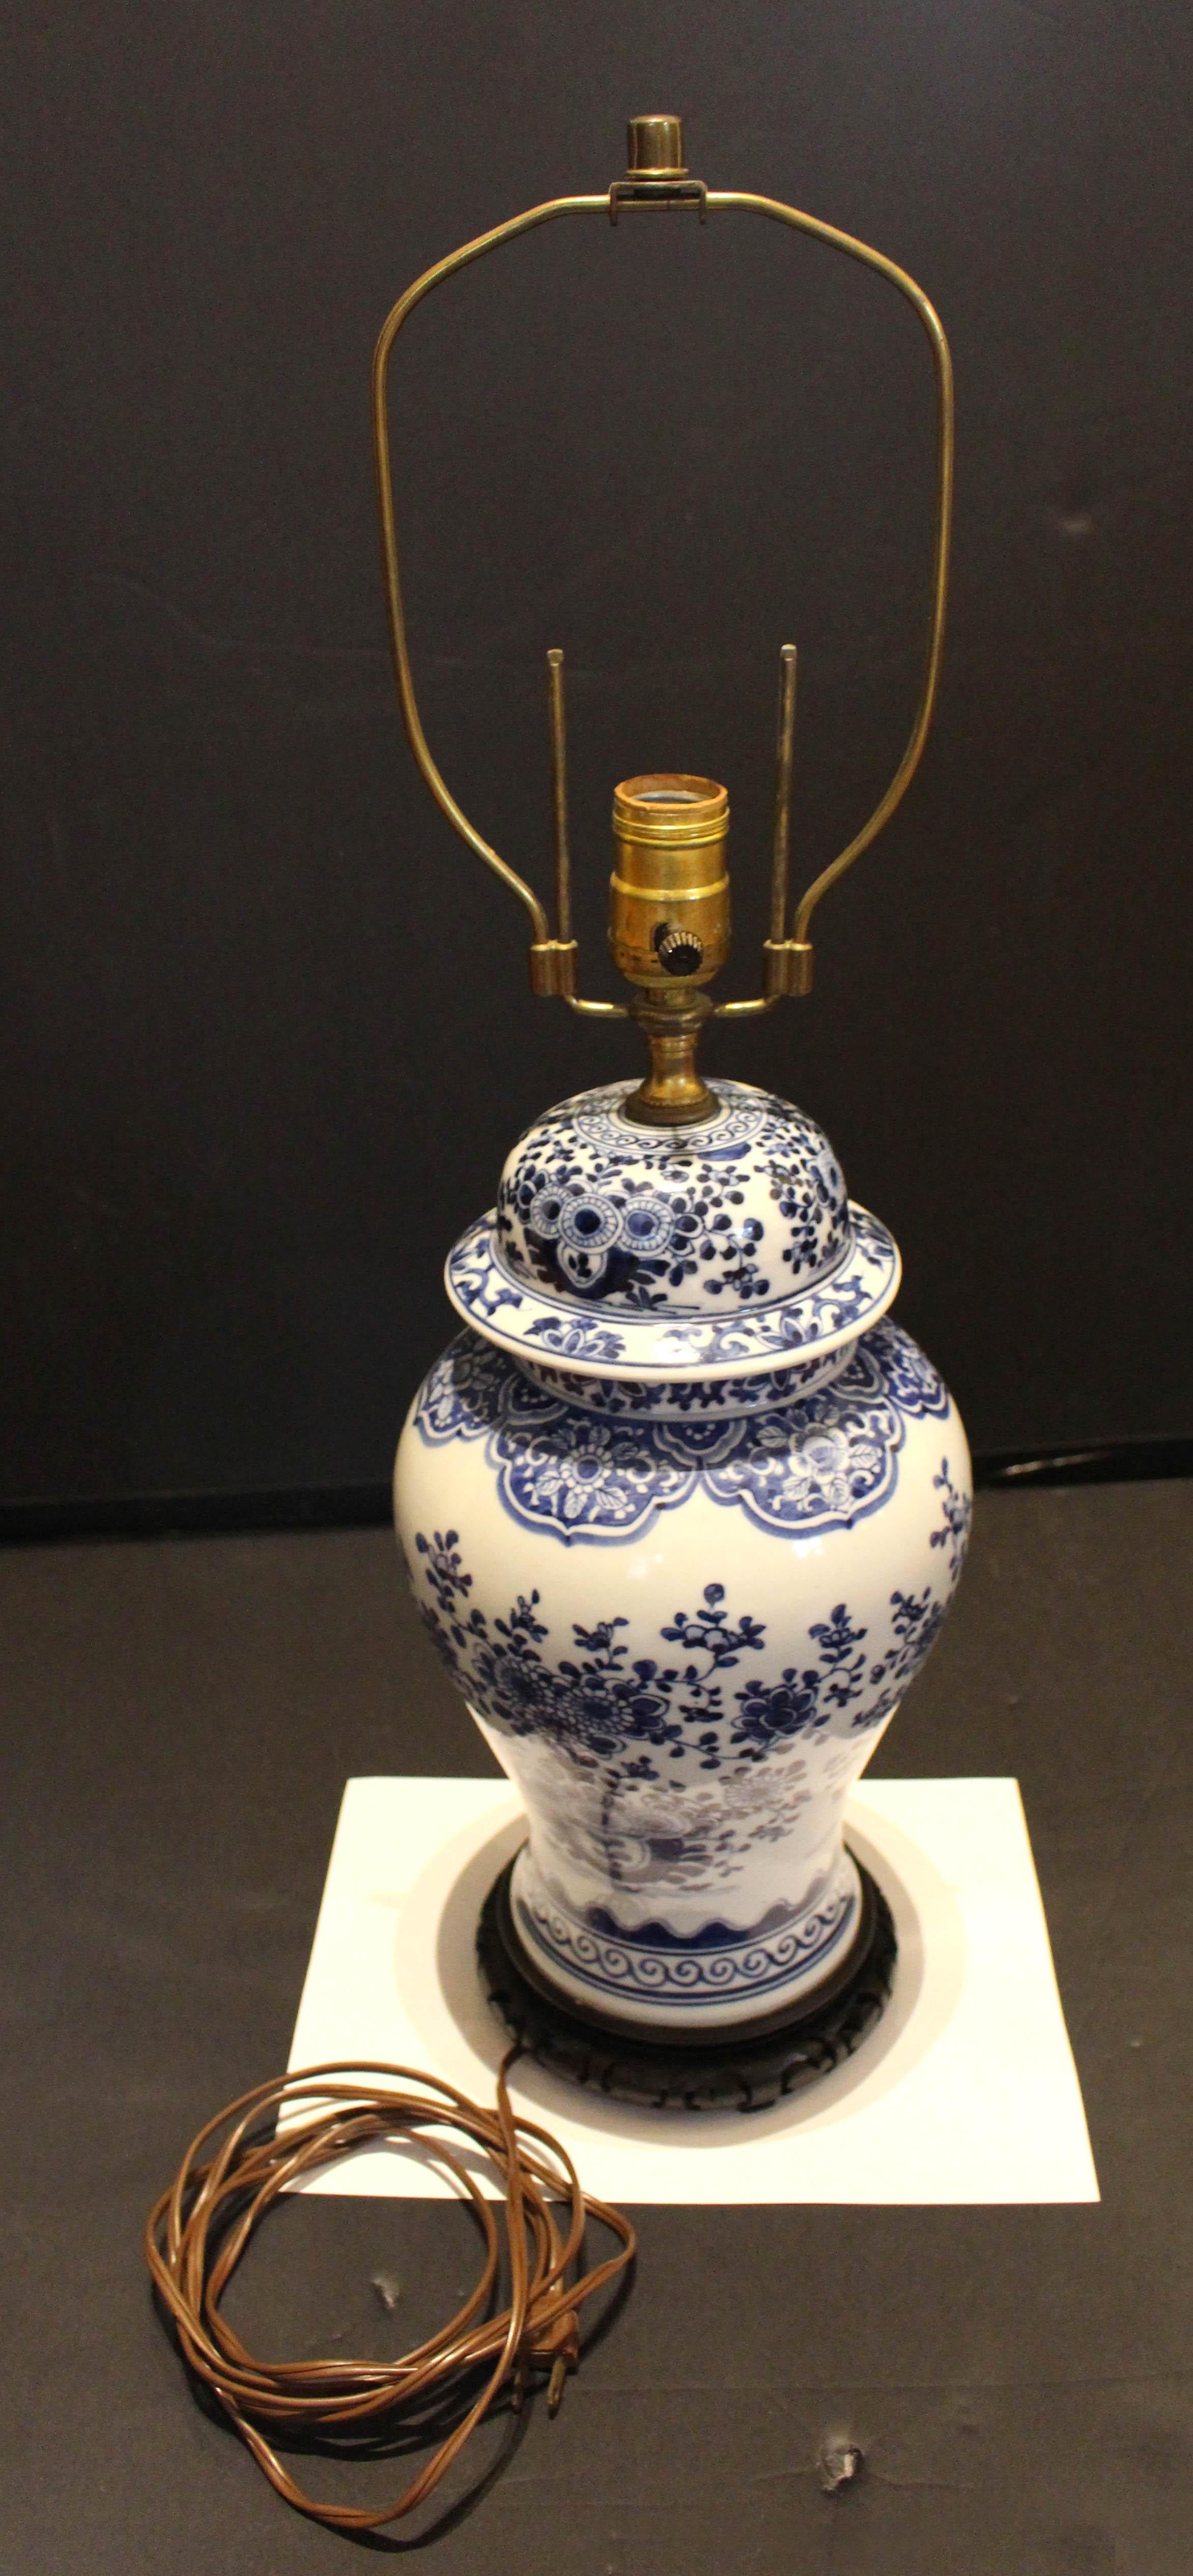 Late 19th century covered ginger jar lamp, Chinese. Blue & white porcelain. Likely made into a lamp in the mid 20th century. Attractive baluster form, well decorated with large potted flowering trees & naturalistic motifs.
19.25